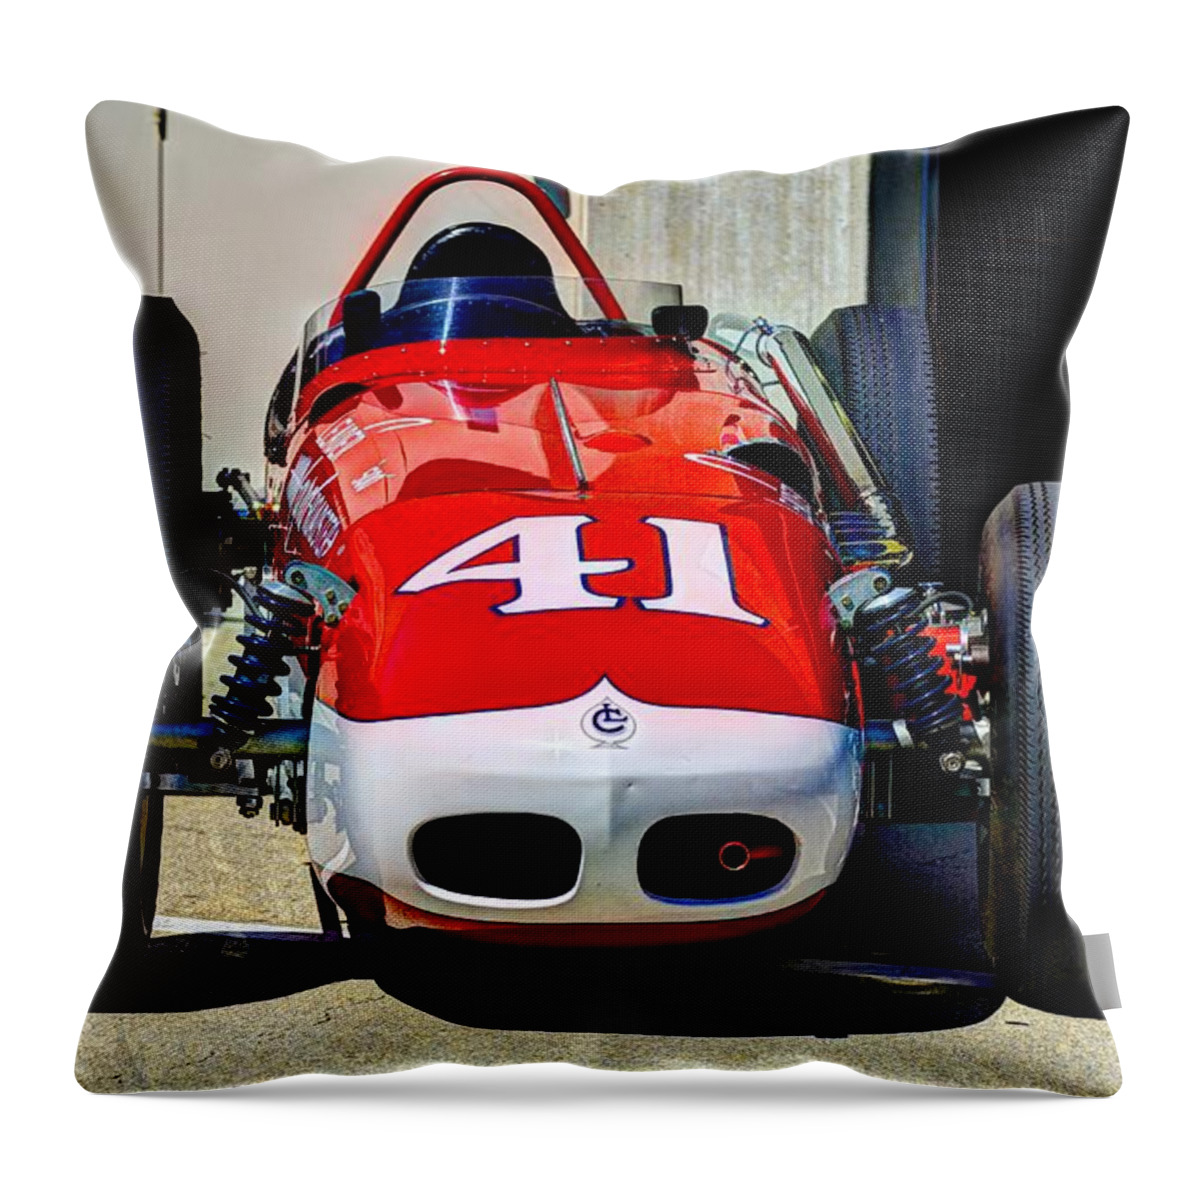 1961 Watson Roadster Throw Pillow featuring the photograph 1961 Watson Roadster by Josh Williams